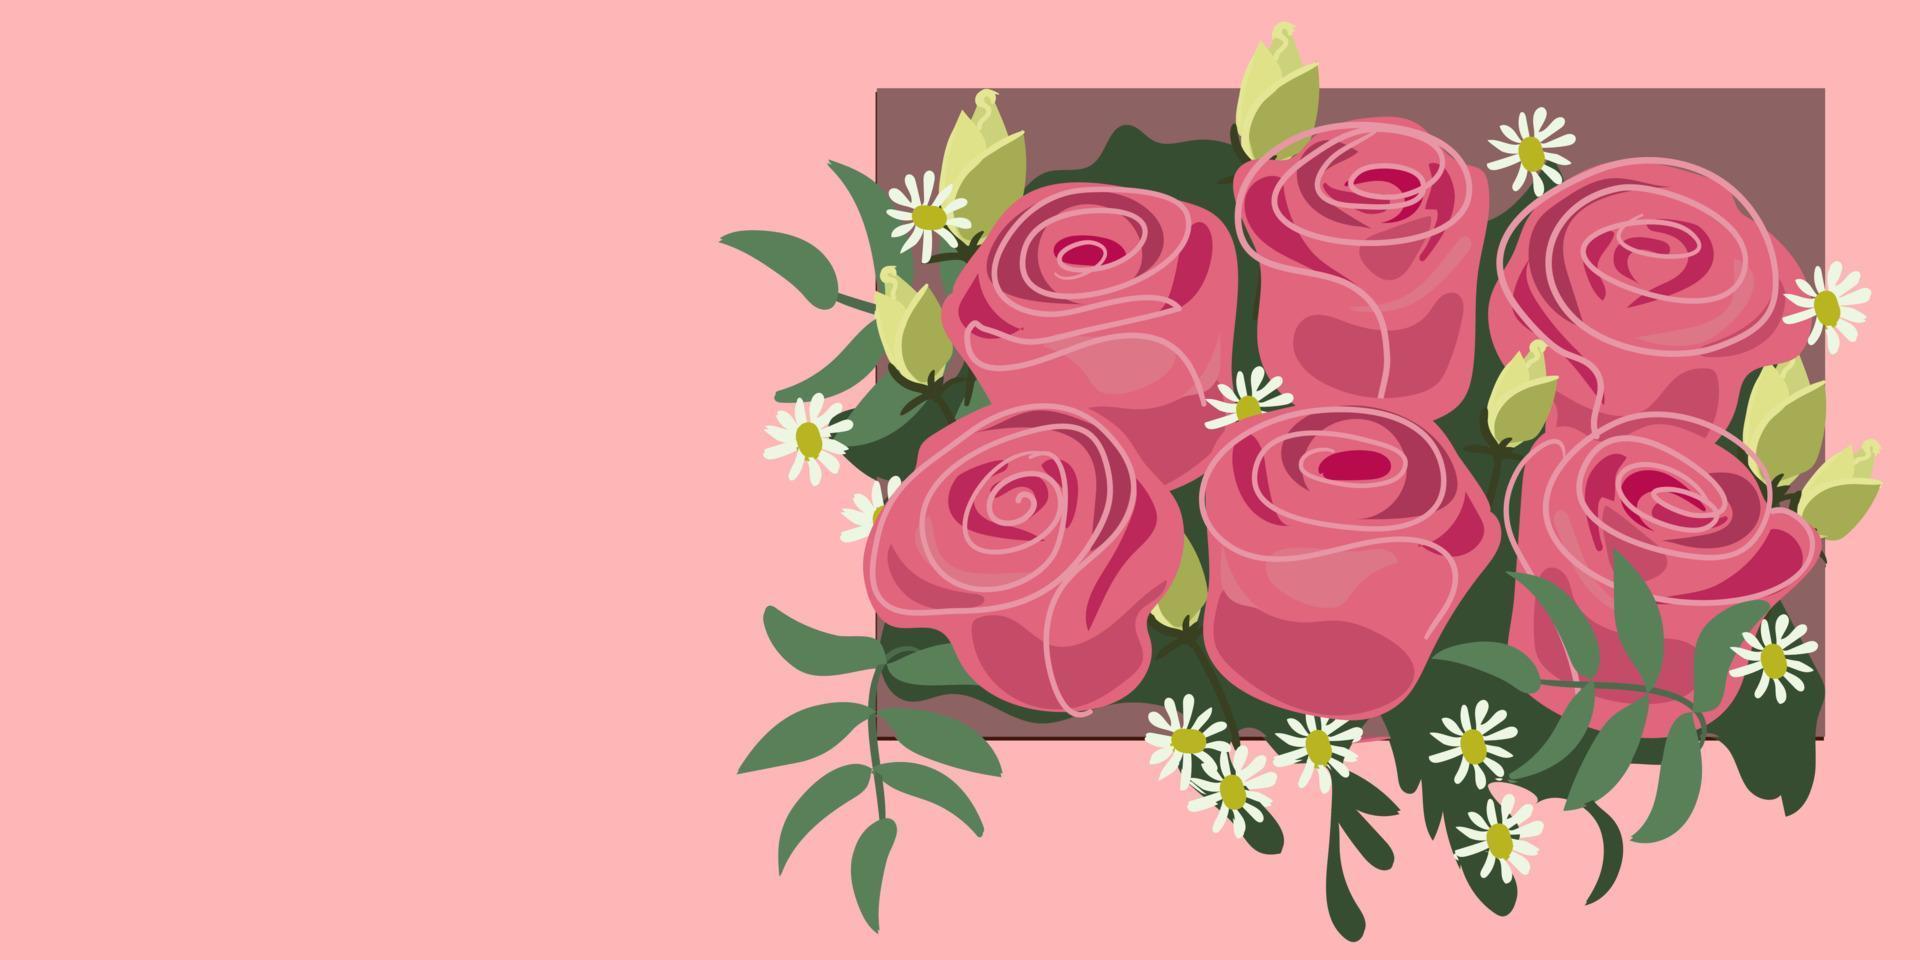 The illustration looks like a bouquet of pink roses peeking out of the frame on a pink background. Background with an illustration for the holiday with a place for the text. Theme is Valentine's Day. vector